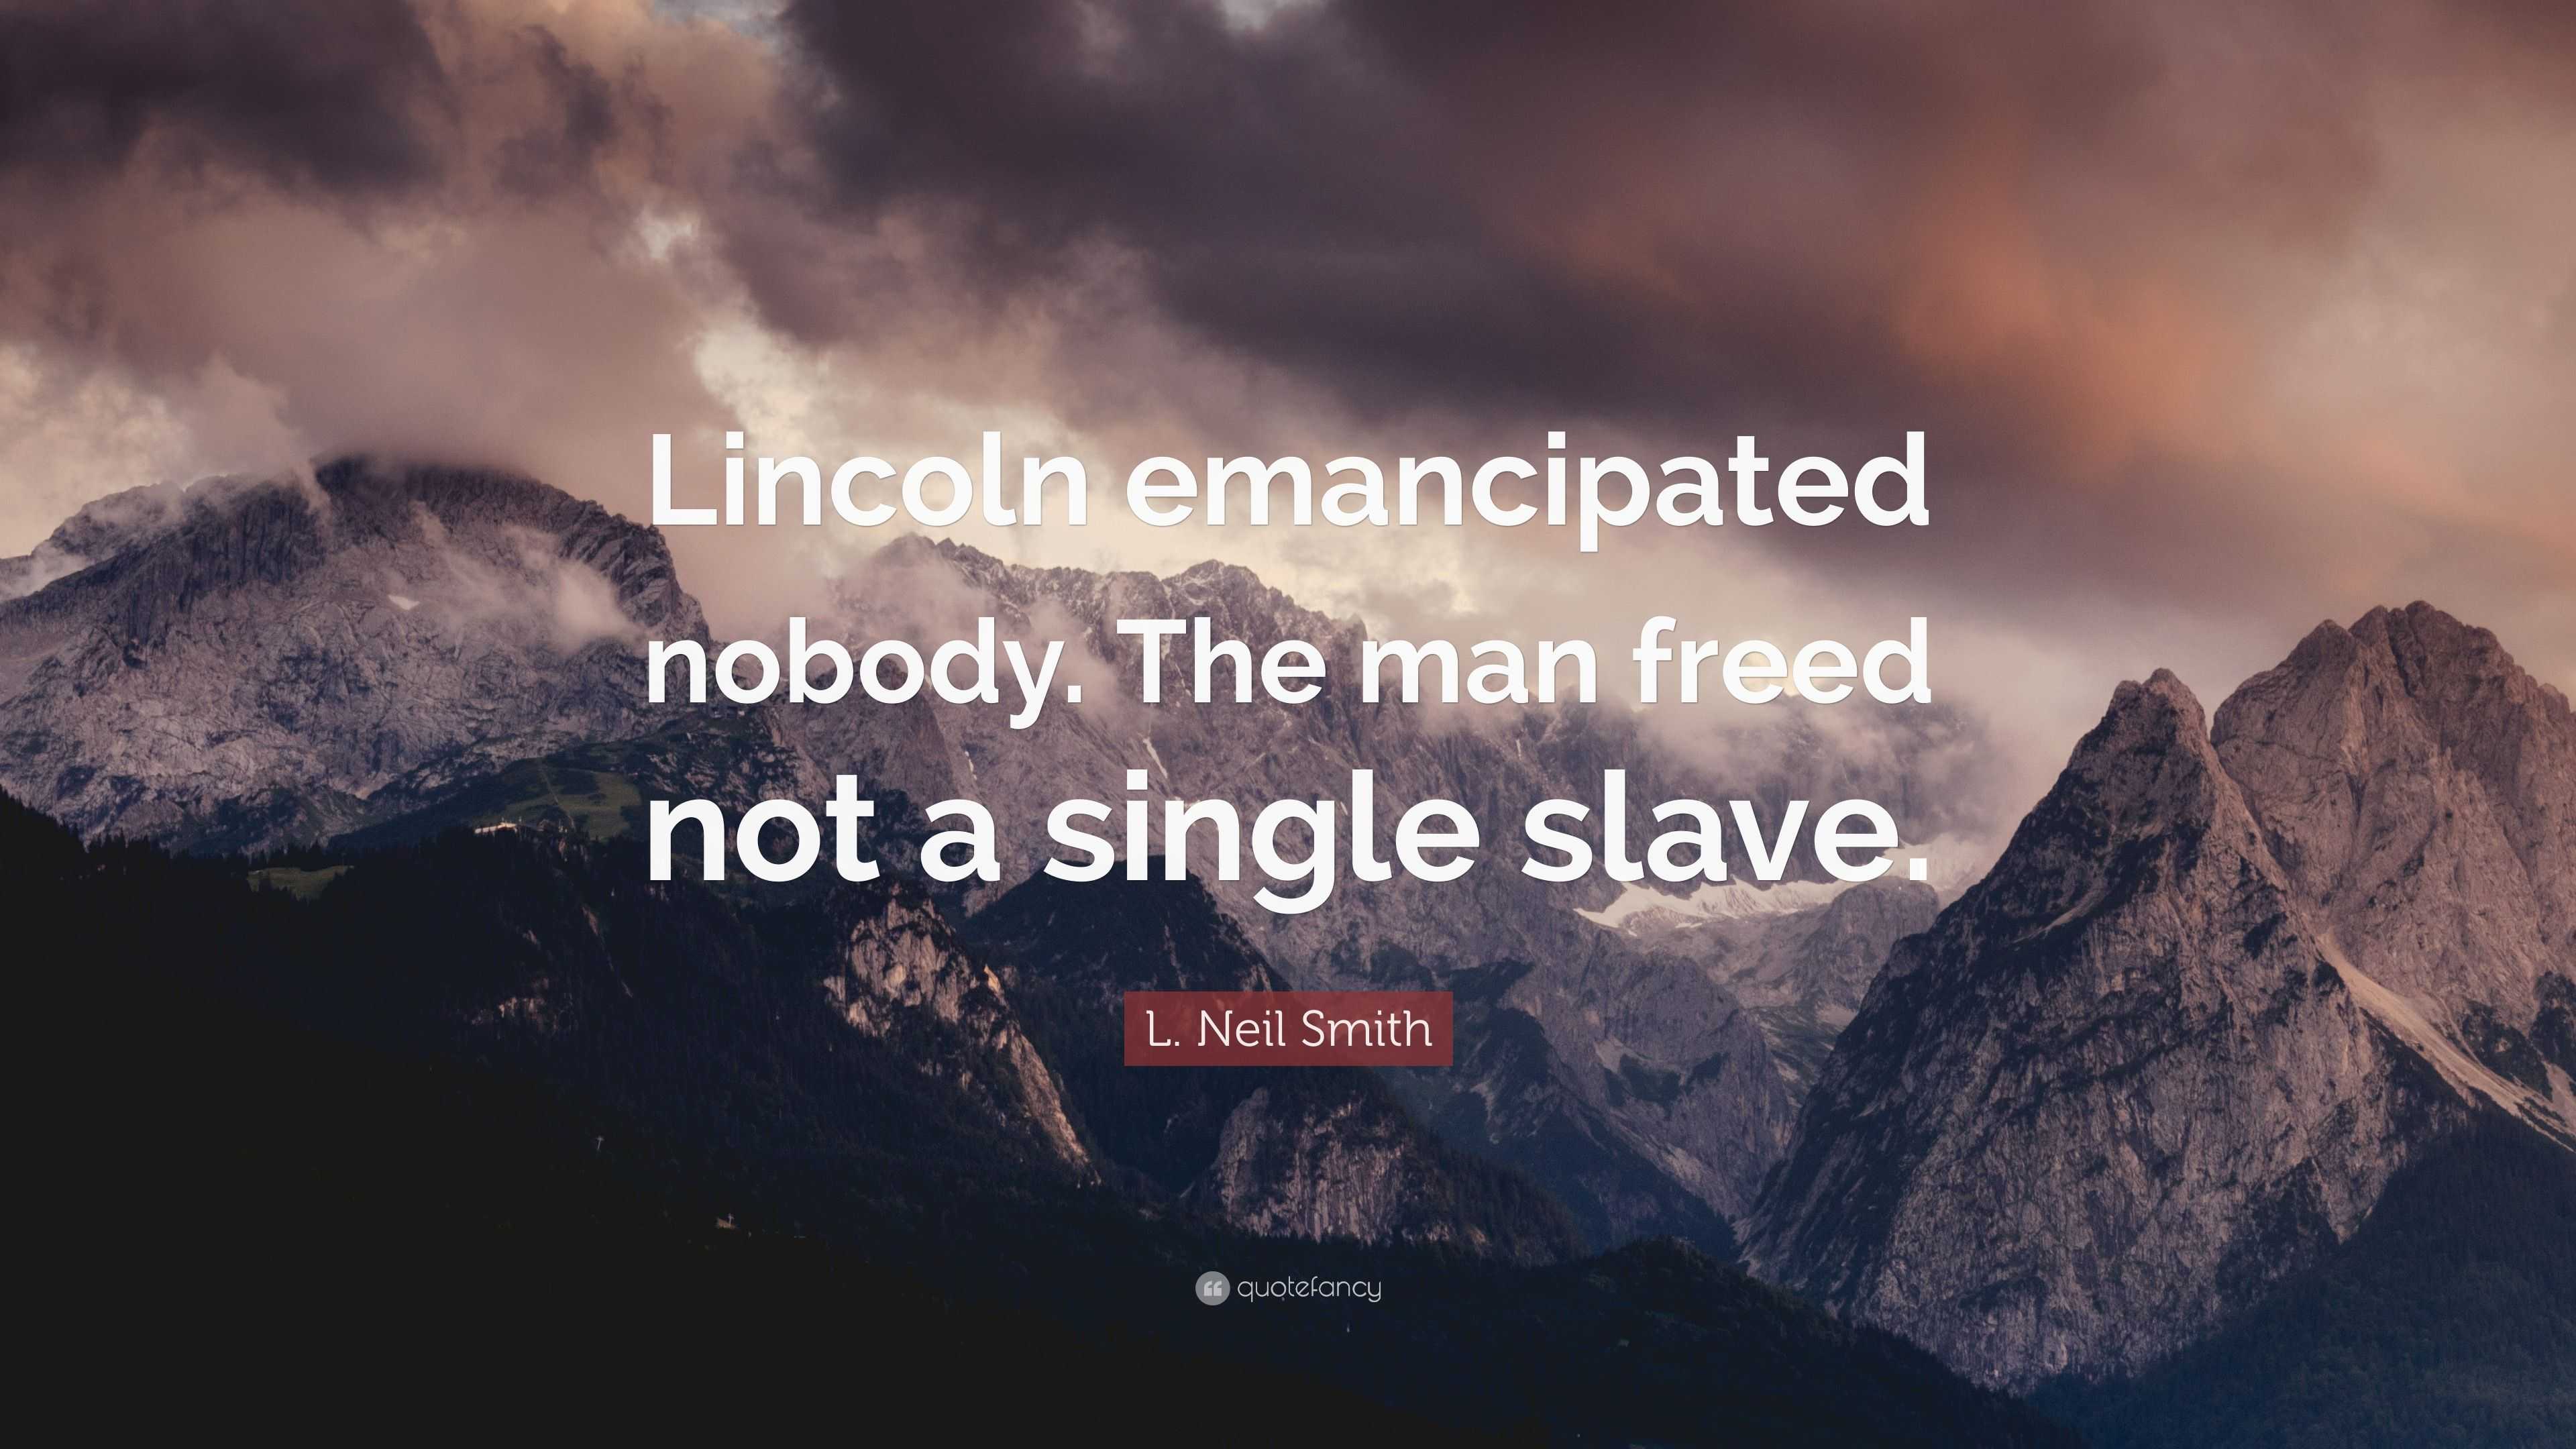 L. Neil Smith Quote: “Lincoln emancipated nobody. The man freed not a ...